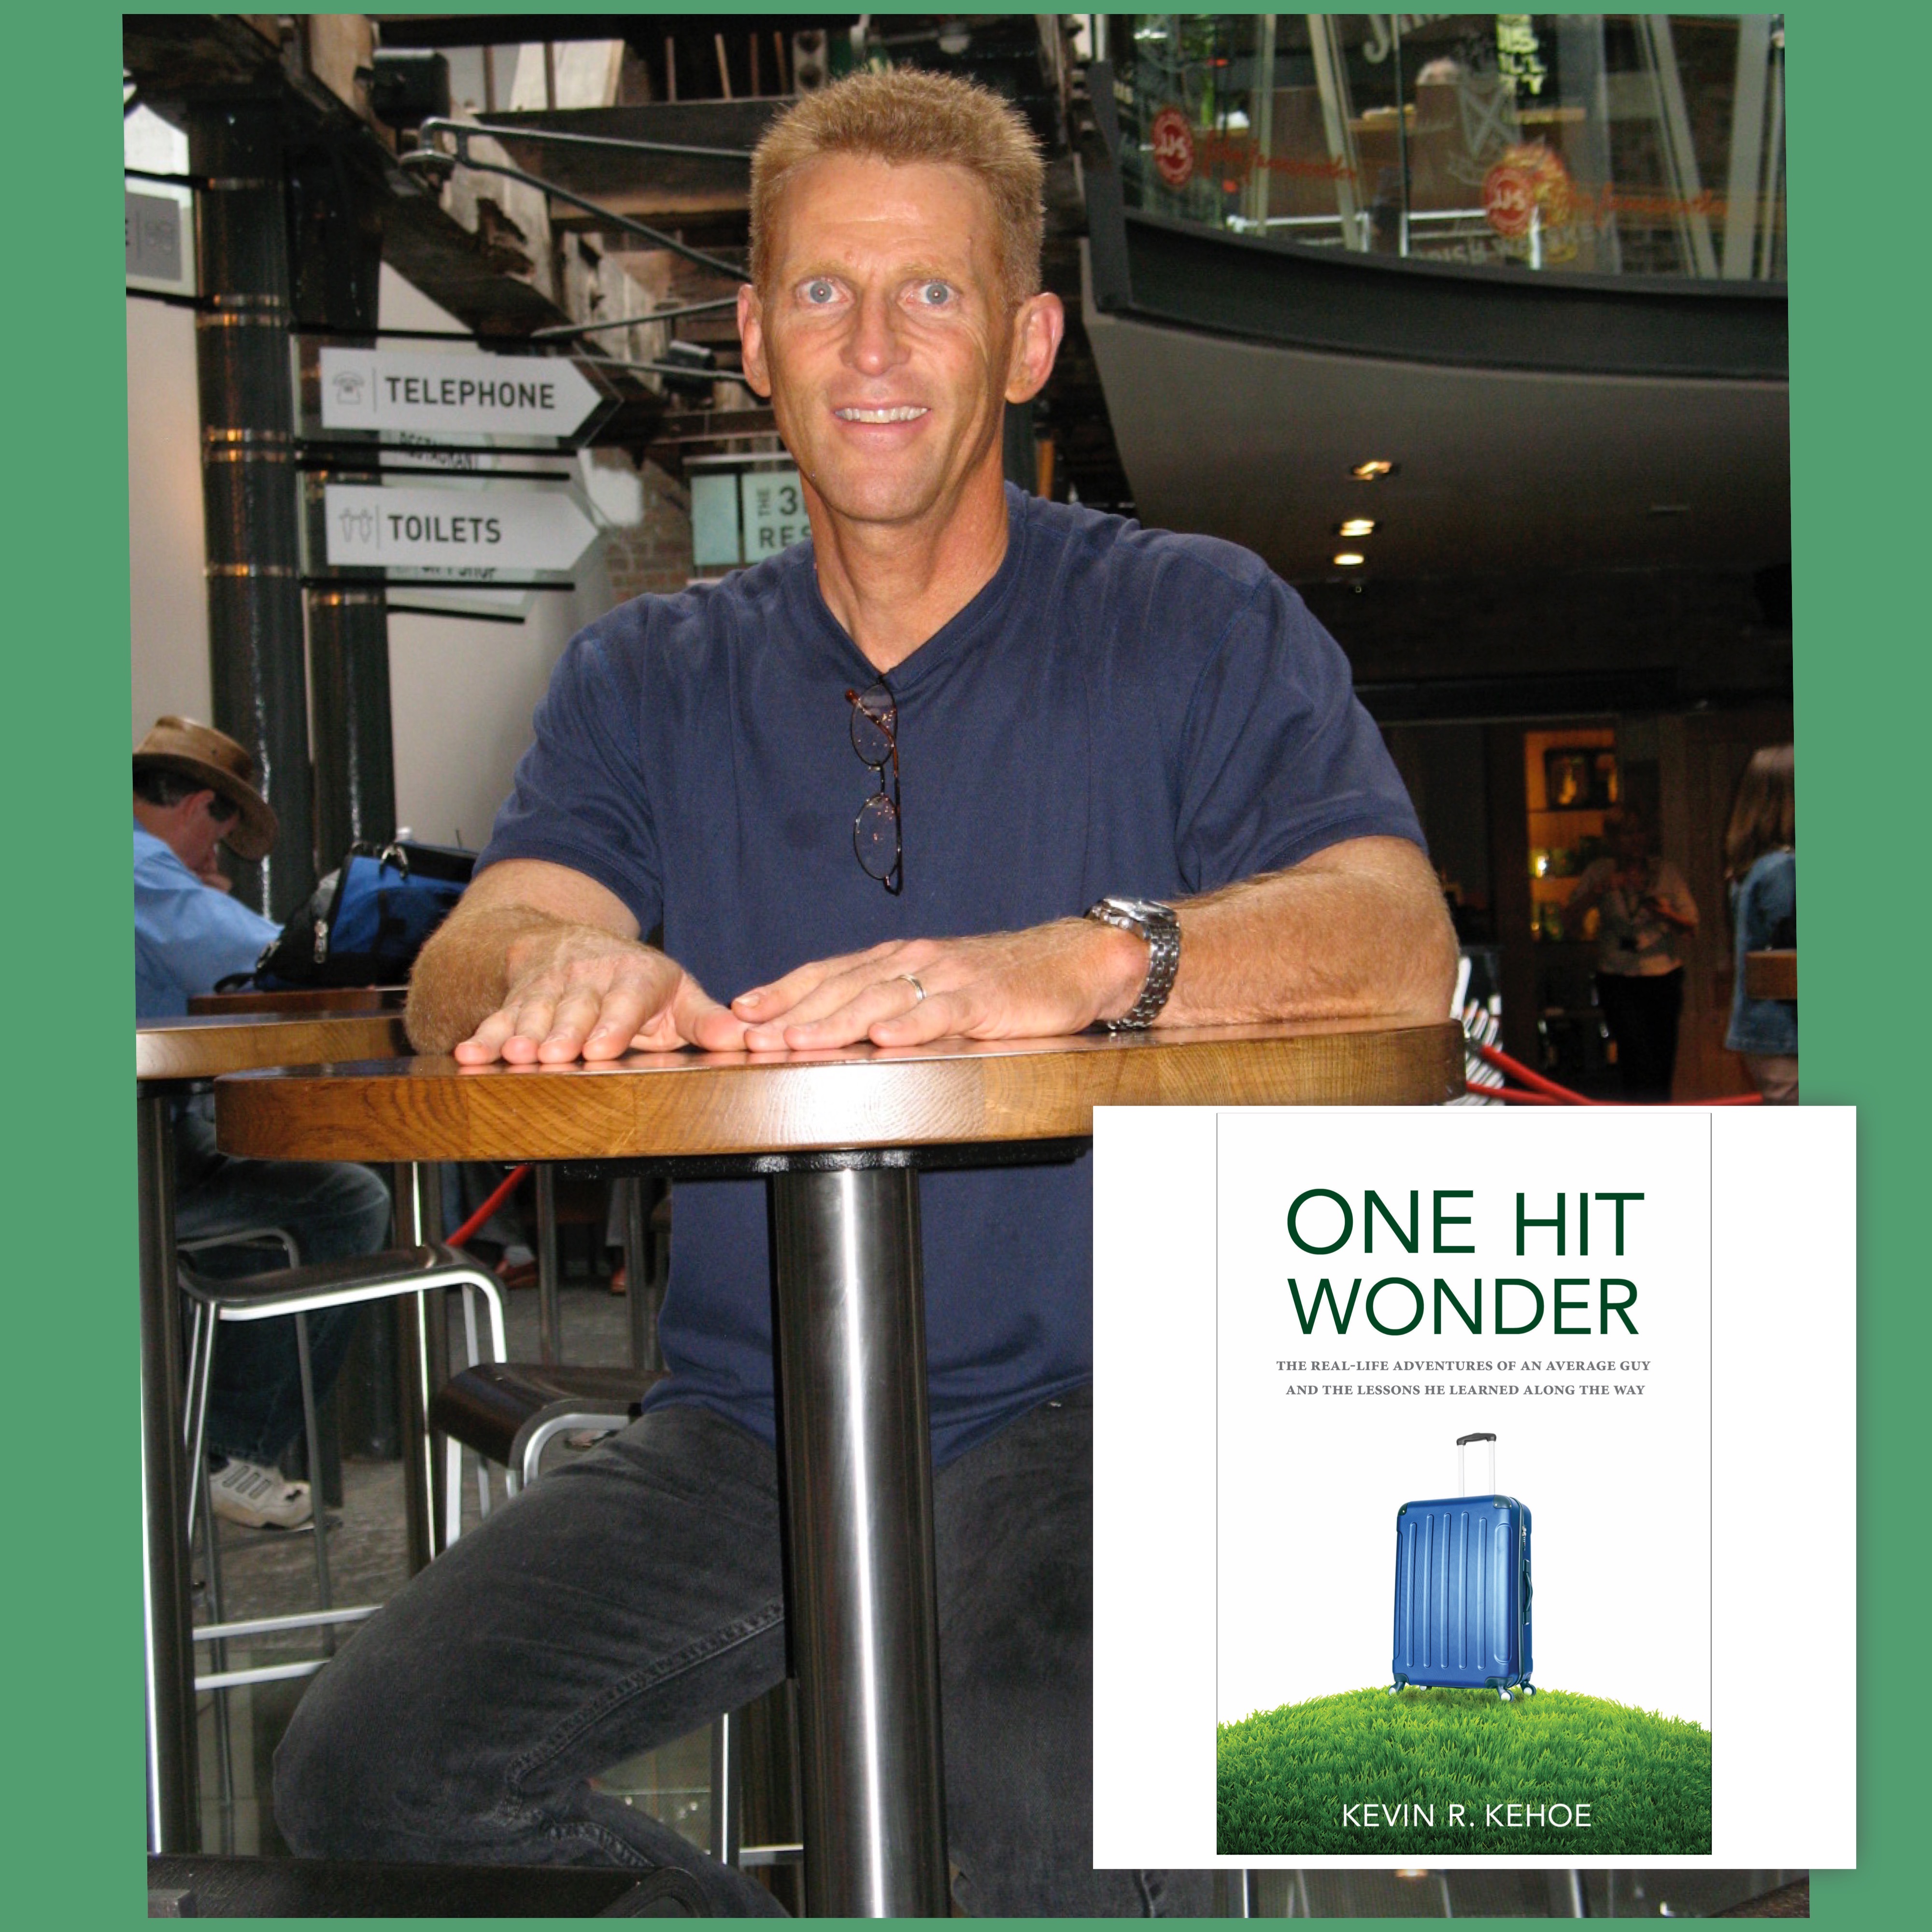 After Kevin R. Kehoe’s Aspire Software company was fully acquired in 2021, he wrote his “One Hit Wonder” book and started the Kehoe Family Foundation to give back.